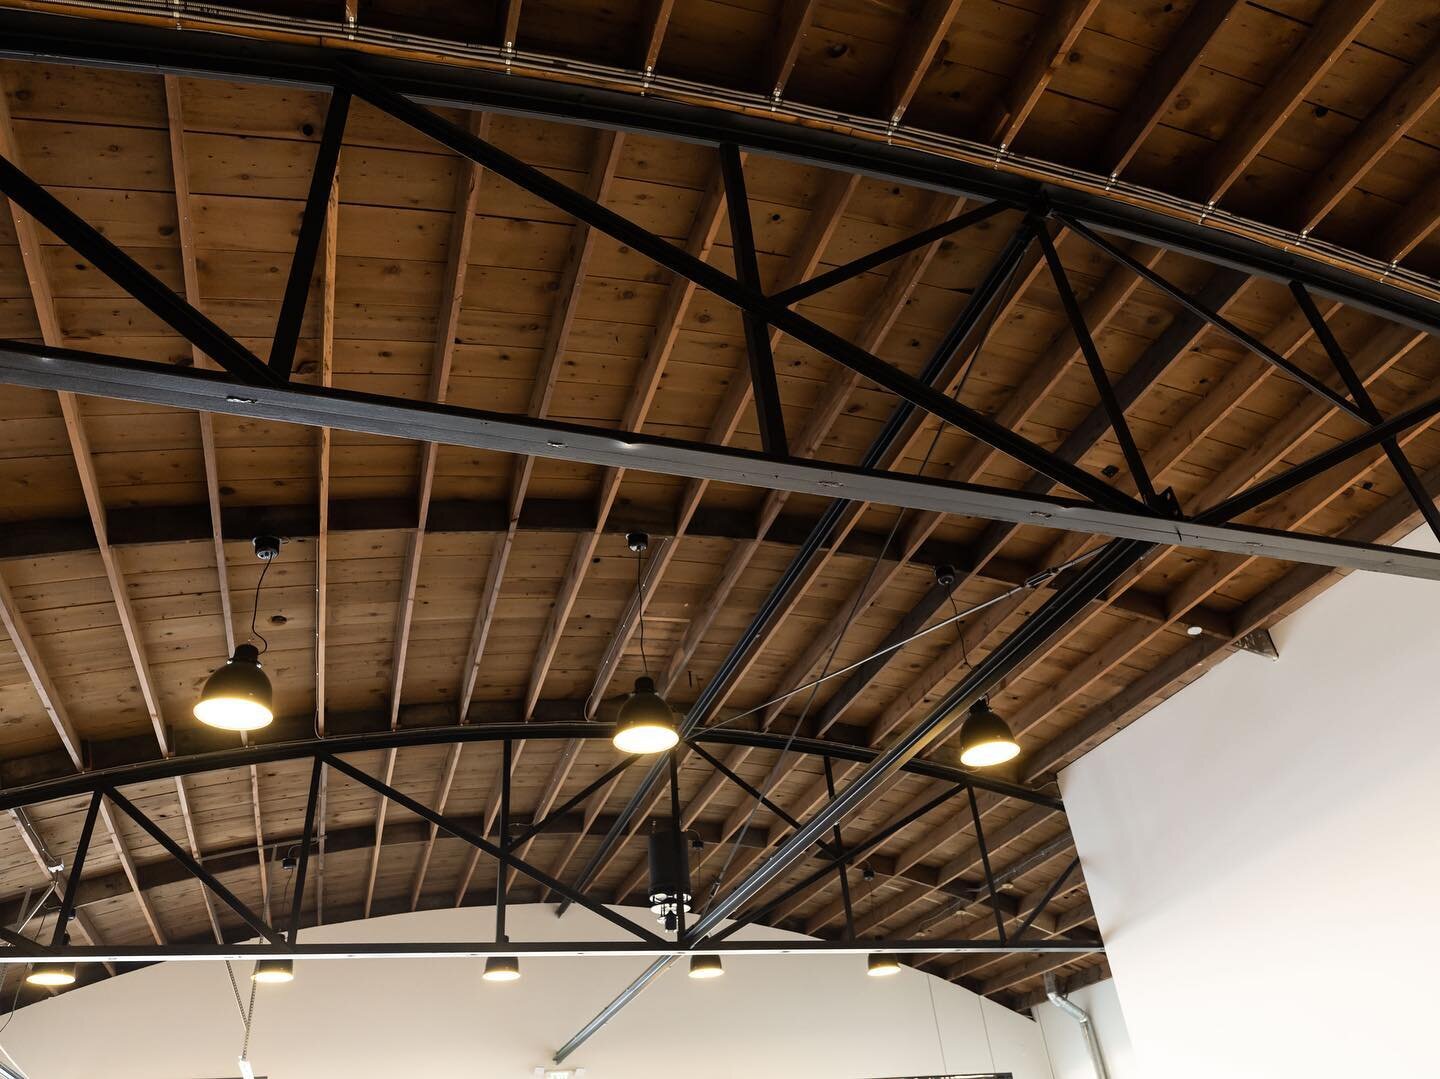 The first feature that caught our eye when we peered into the window of the vacant and gutted shell of a building was this beautiful, wooden barrel roof with the steel bowstring trusses.